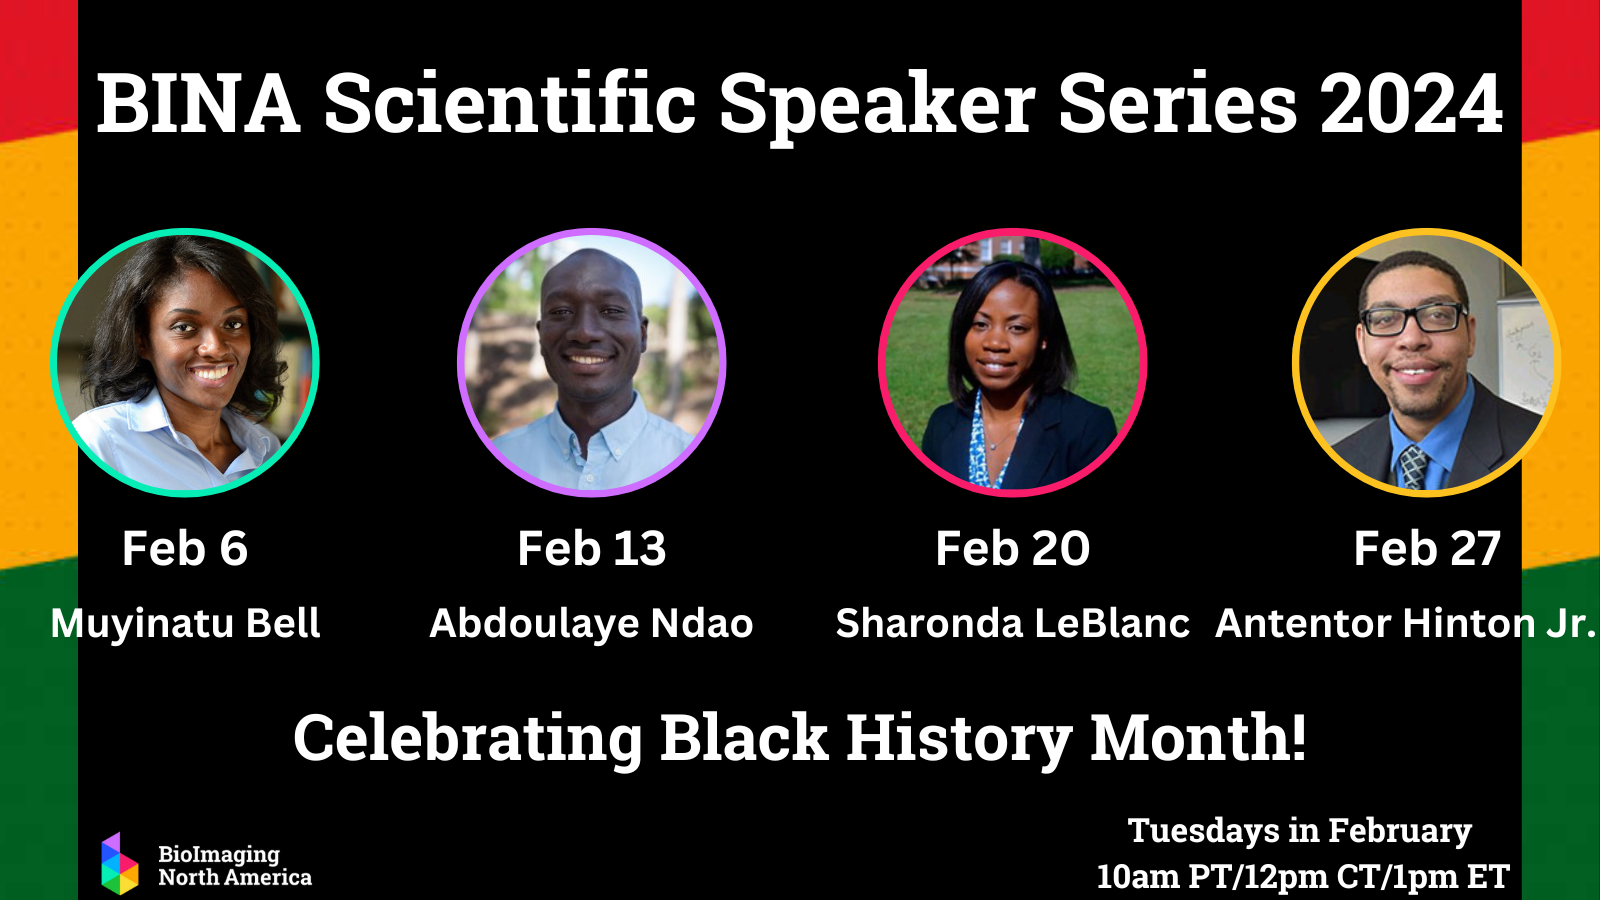 Flyer for the BINA’s 2024 Scientific Speaker Series in February Celebrating Black History Month! With a photo of each of the 4 presenters: Feb 6 - Muyinatu Bell, Feb 20- Sharonda LeBlanc, Feb 27 - Antentor Hinton Jr.